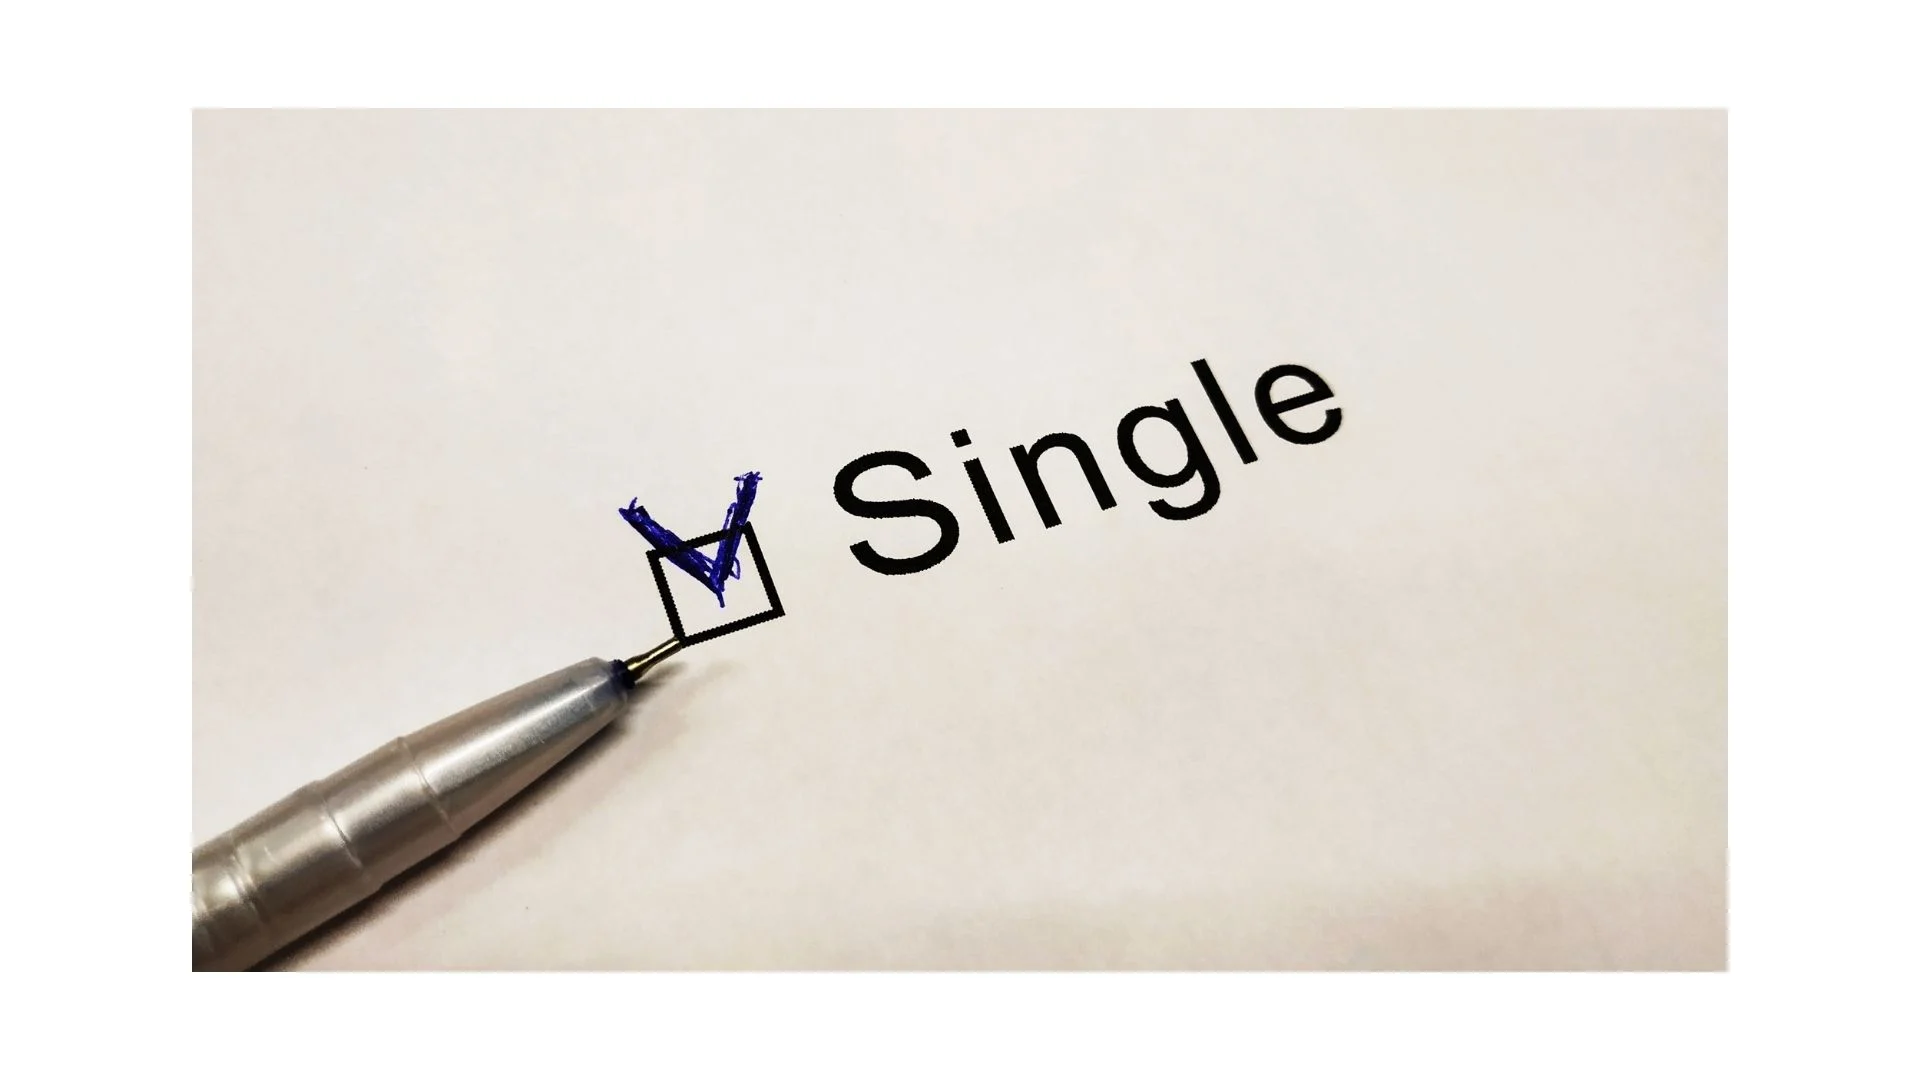 The persk of being single 